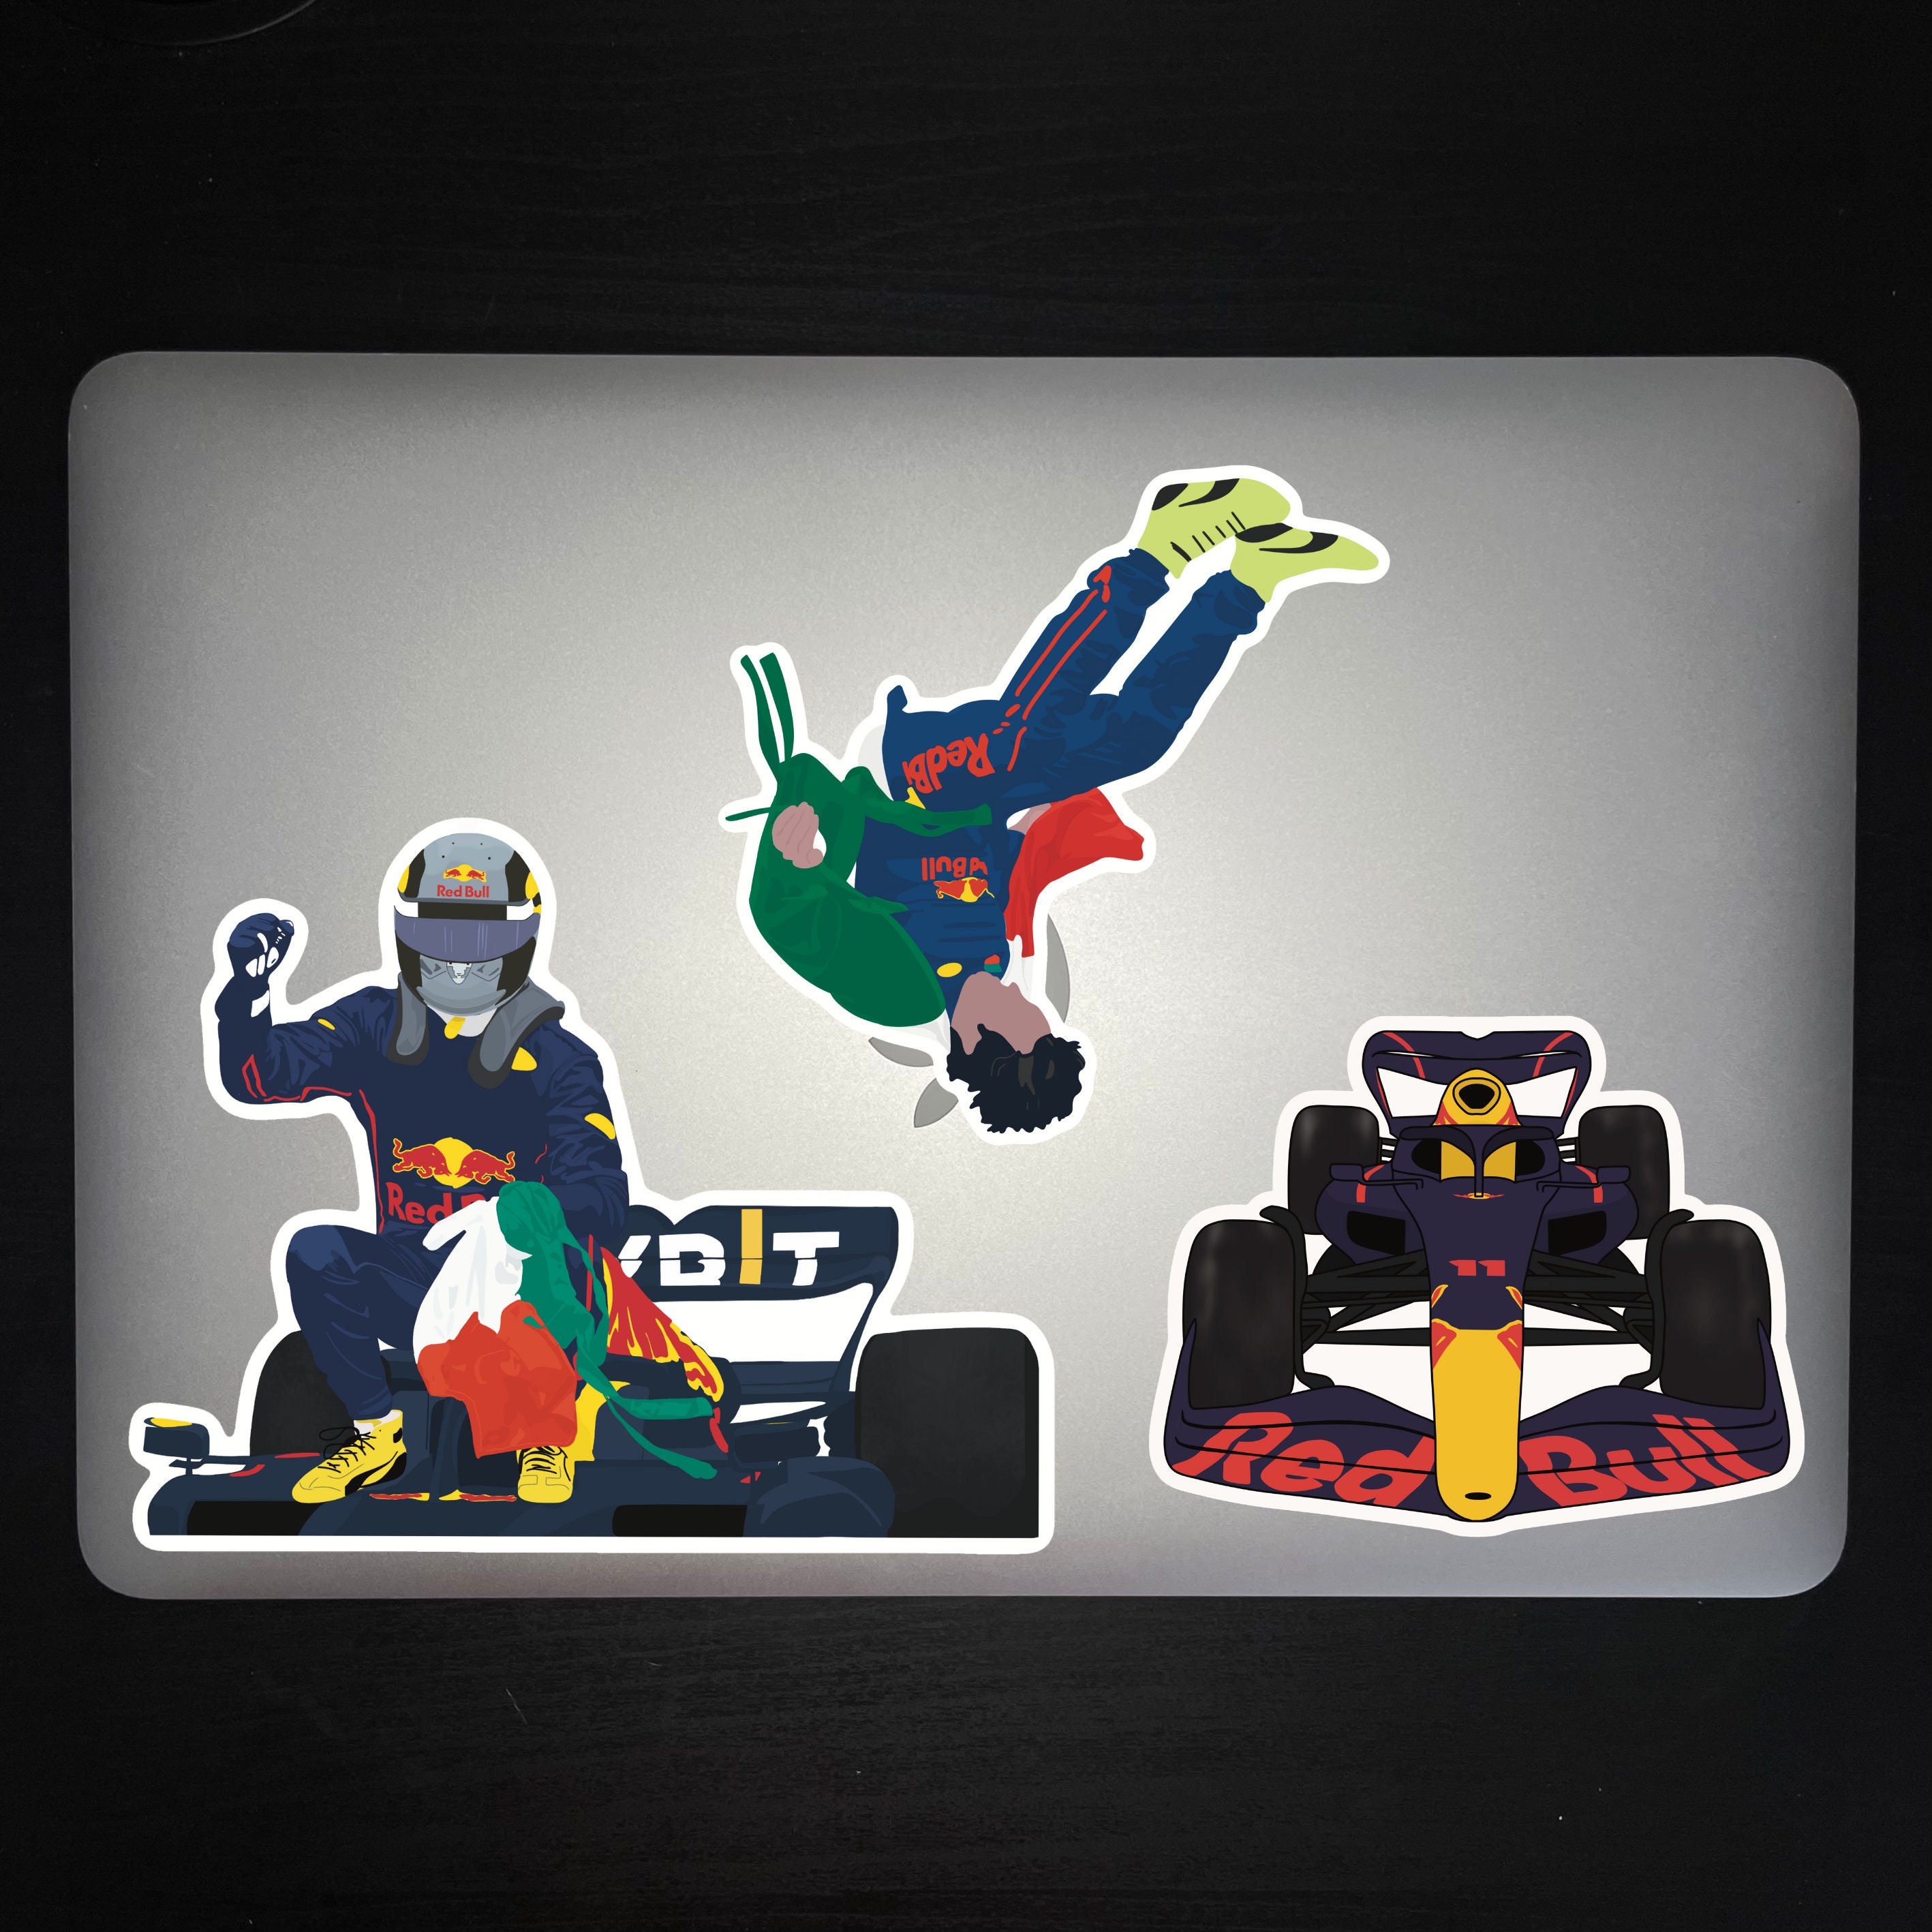 Big red bull Sticker for Sale by GoldCollection